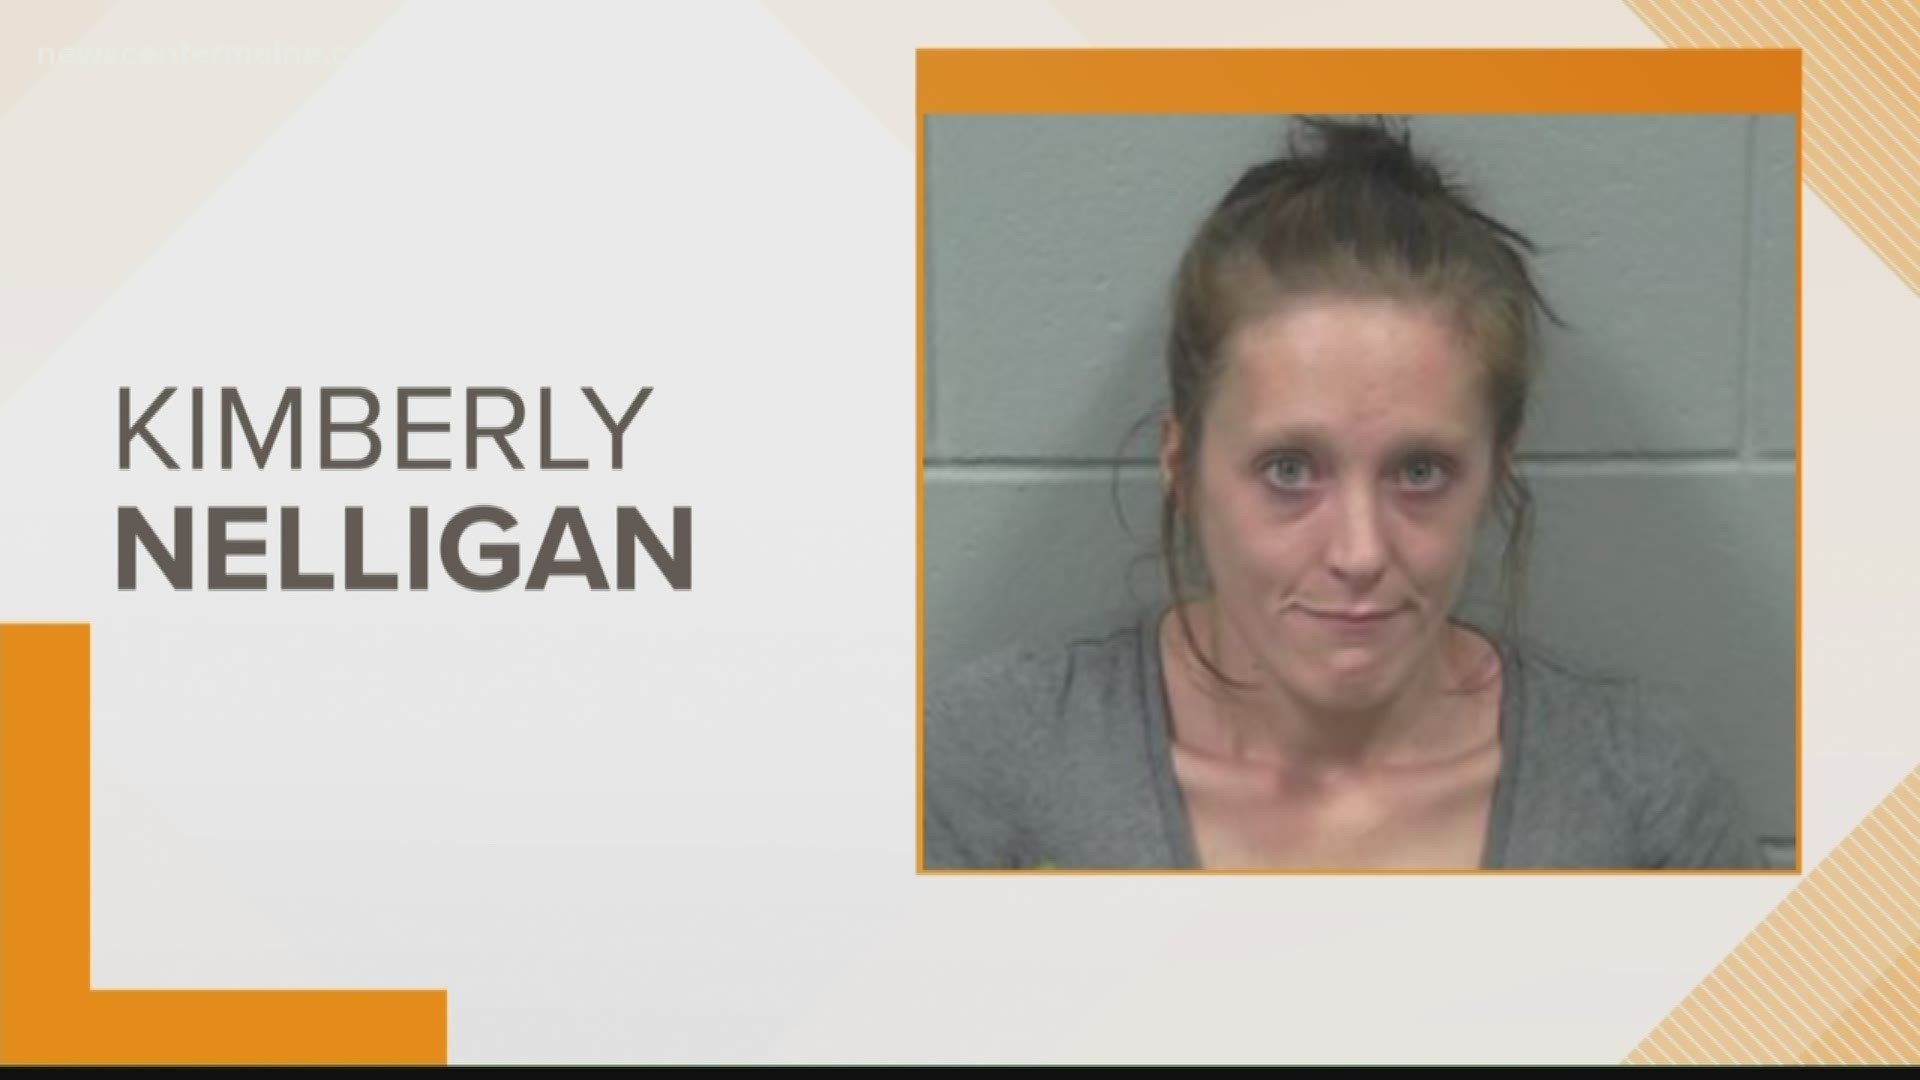 A year after the death of her daughter, Kimberly Nelligan faces charges for endangering the welfare of a child. The medical examiner determined the cause of death to be probable toxic effects of fentanyl.